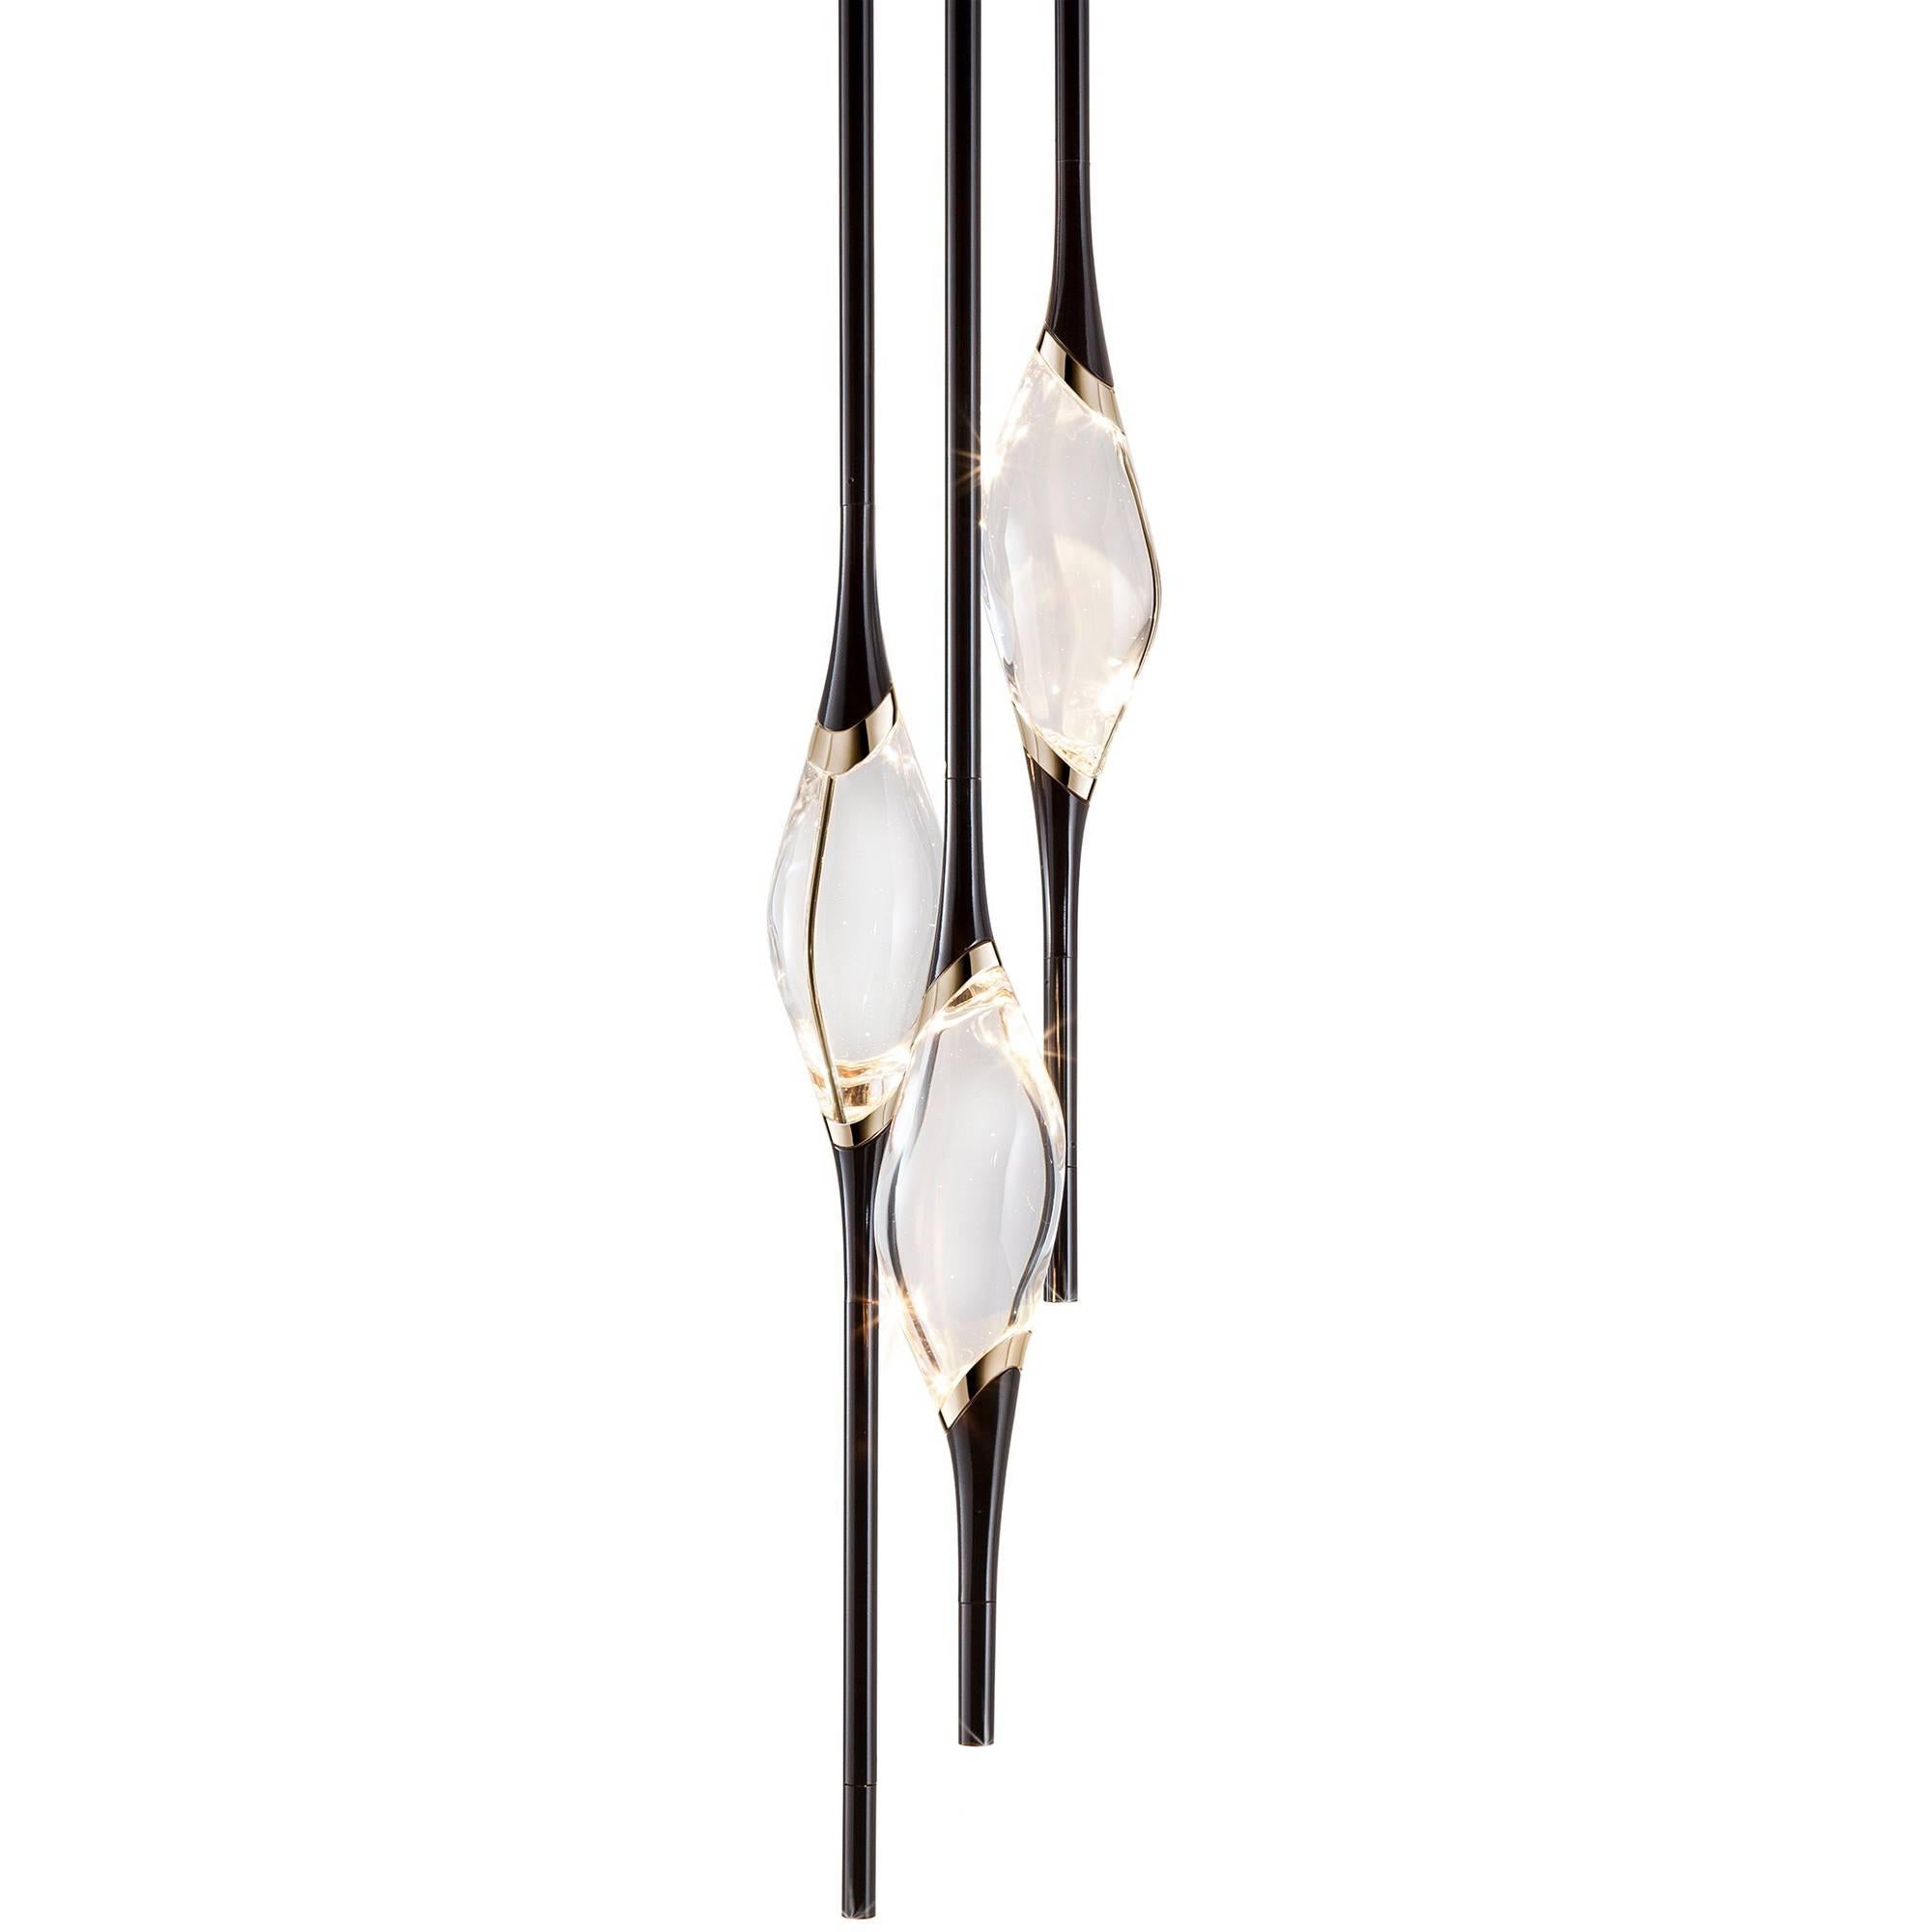 "Il Pezzo 12 Round Chandelier" - height 120cm/47.2" - black and polished brass For Sale